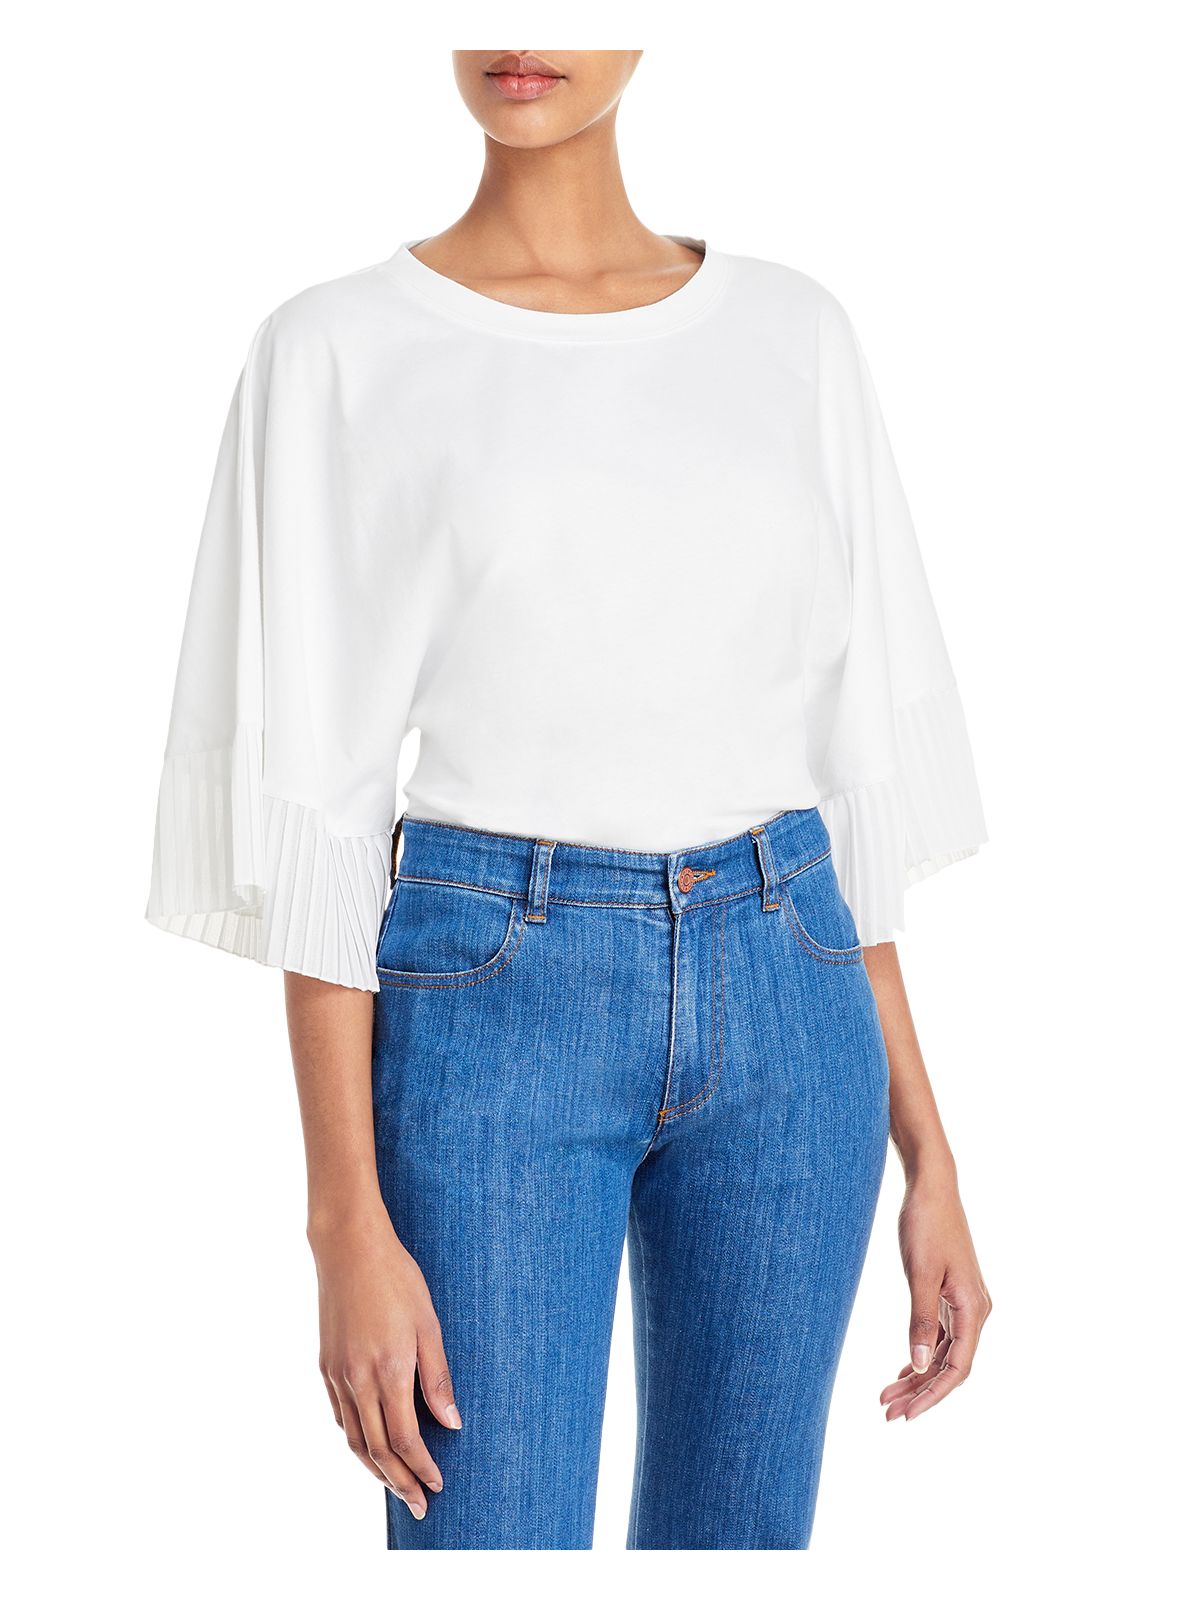 SEE BY CHLOE Womens White Bell Sleeve Round Neck Top L